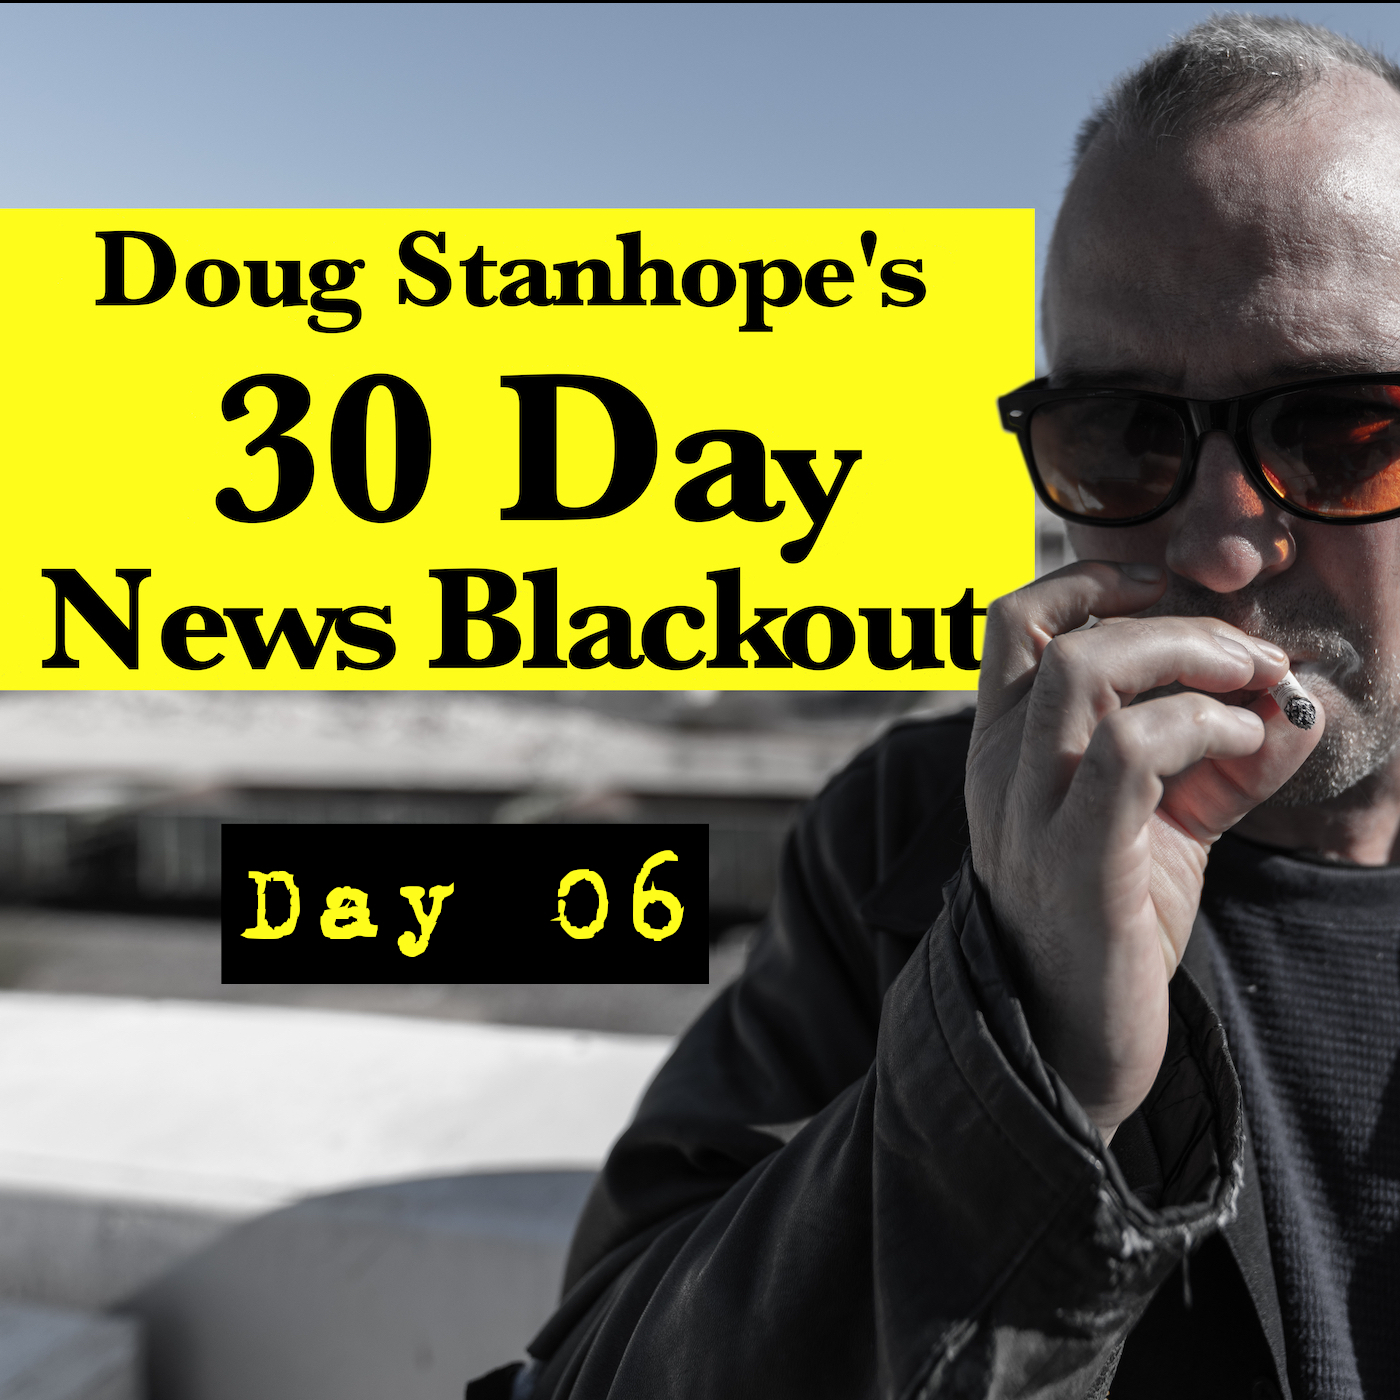 Ep.#370: Day 06 - Stanhope’s 30 Day News Blackout